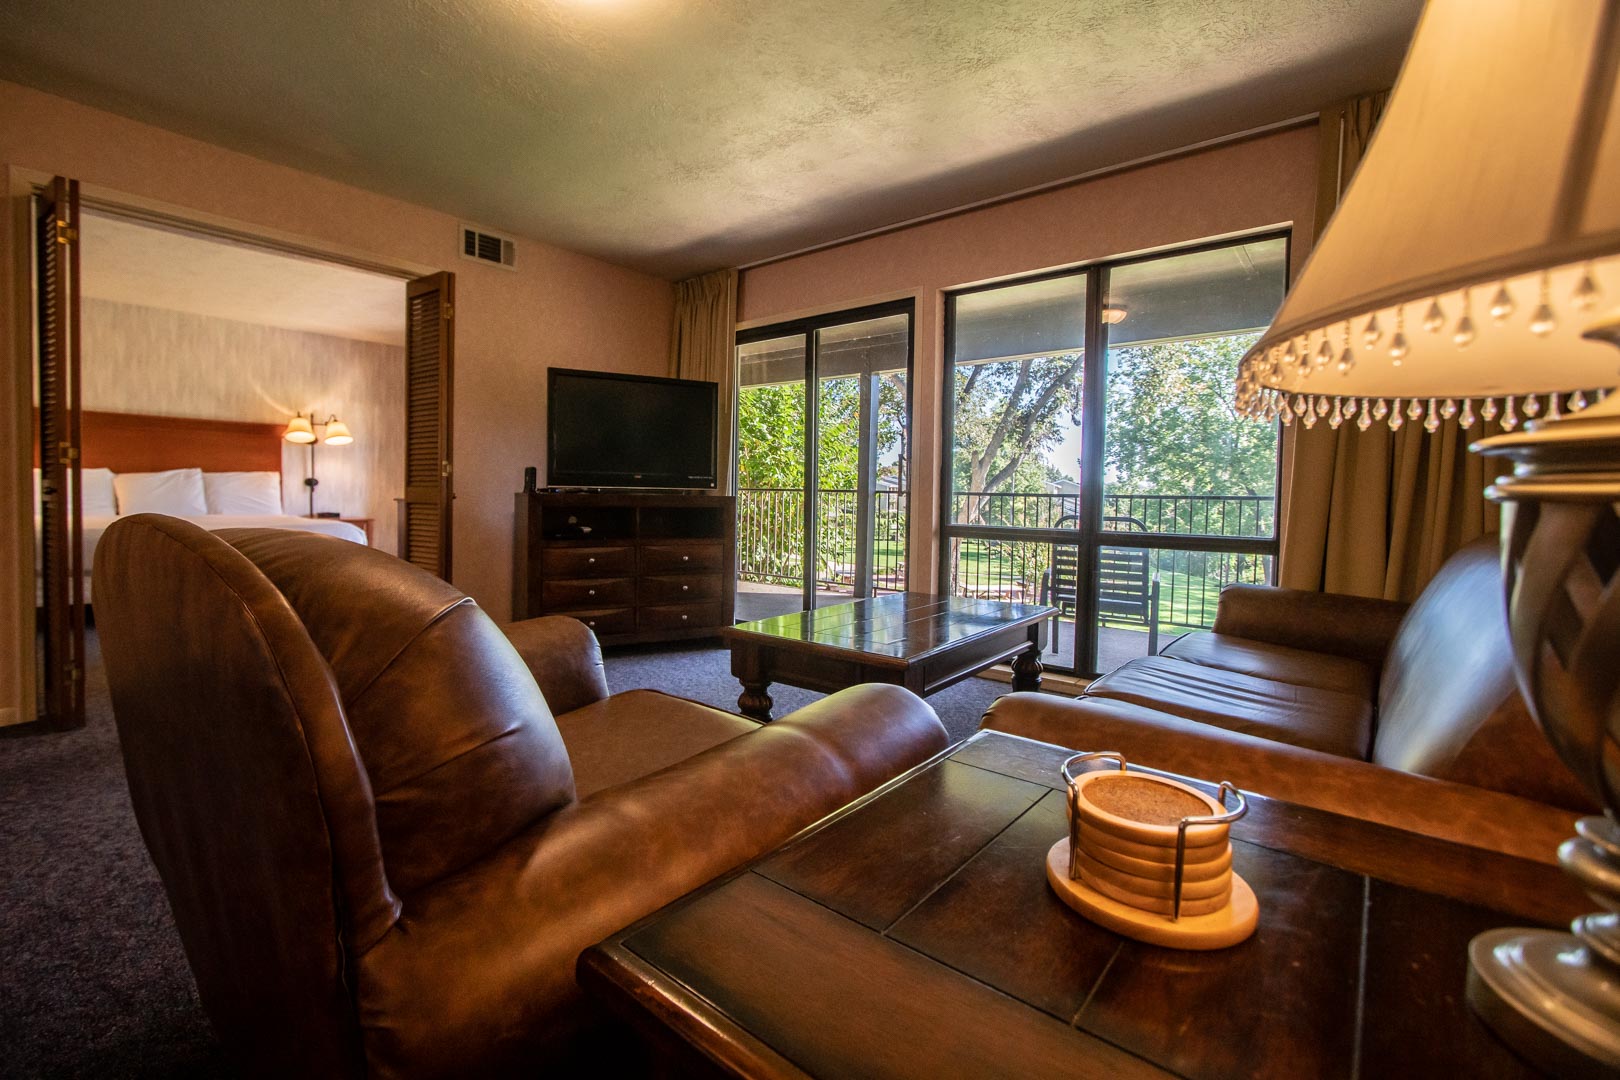 A living room area with access to the balcony at VRI's Sweetwater at Lake Conroe in Montgomery, TX.